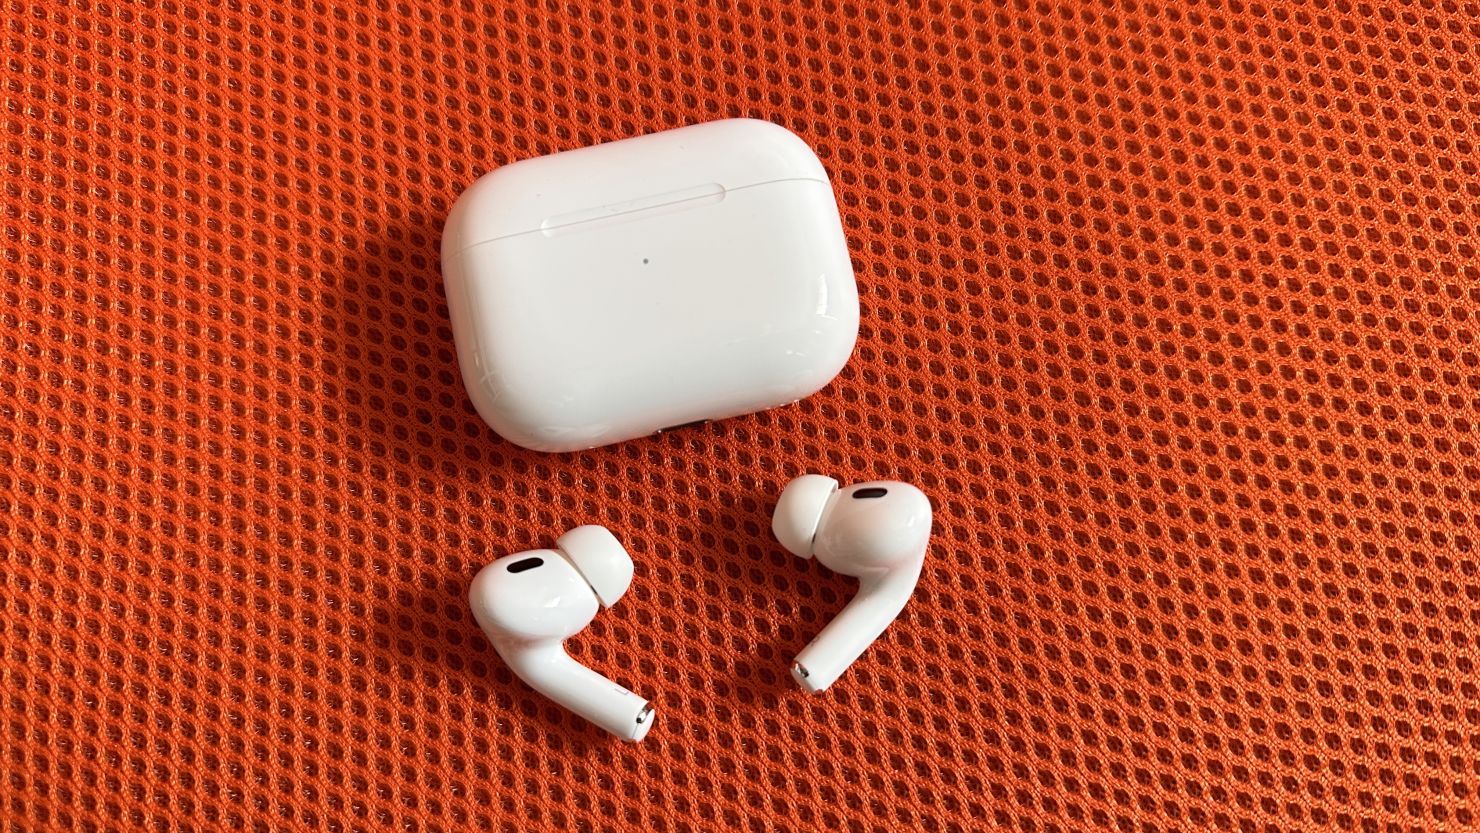 Apple upgrades AirPods Pro (2nd generation) with USB‐C charging - Apple (IN)